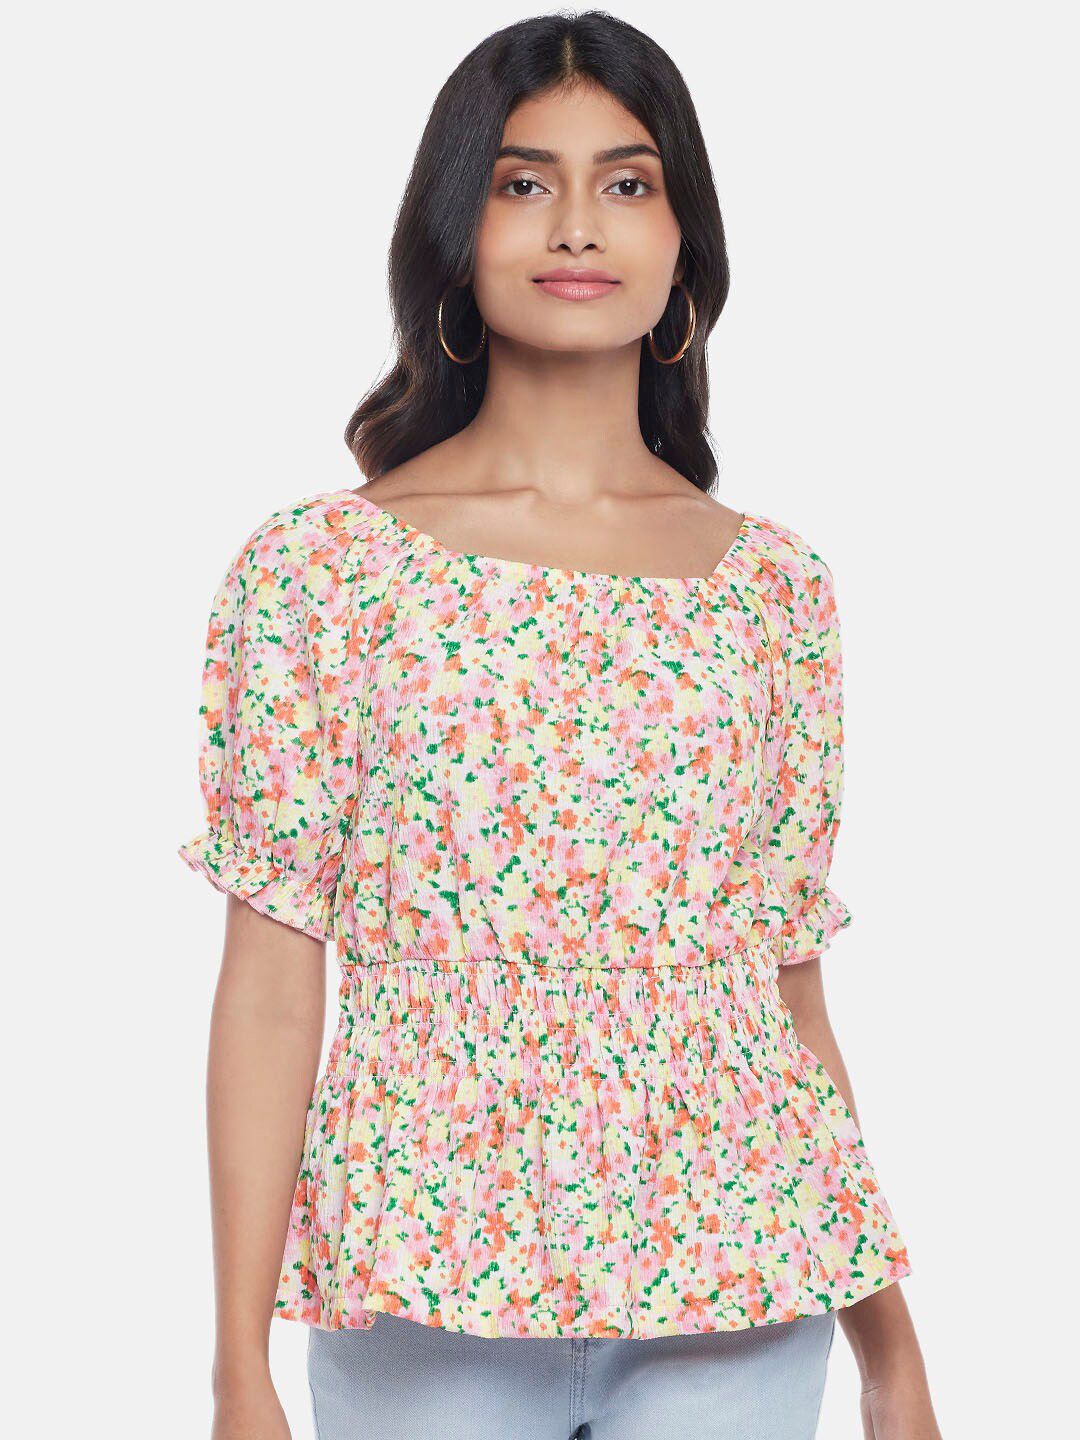 Honey by Pantaloons Multicoloured Floral Print Peplum Top Price in India